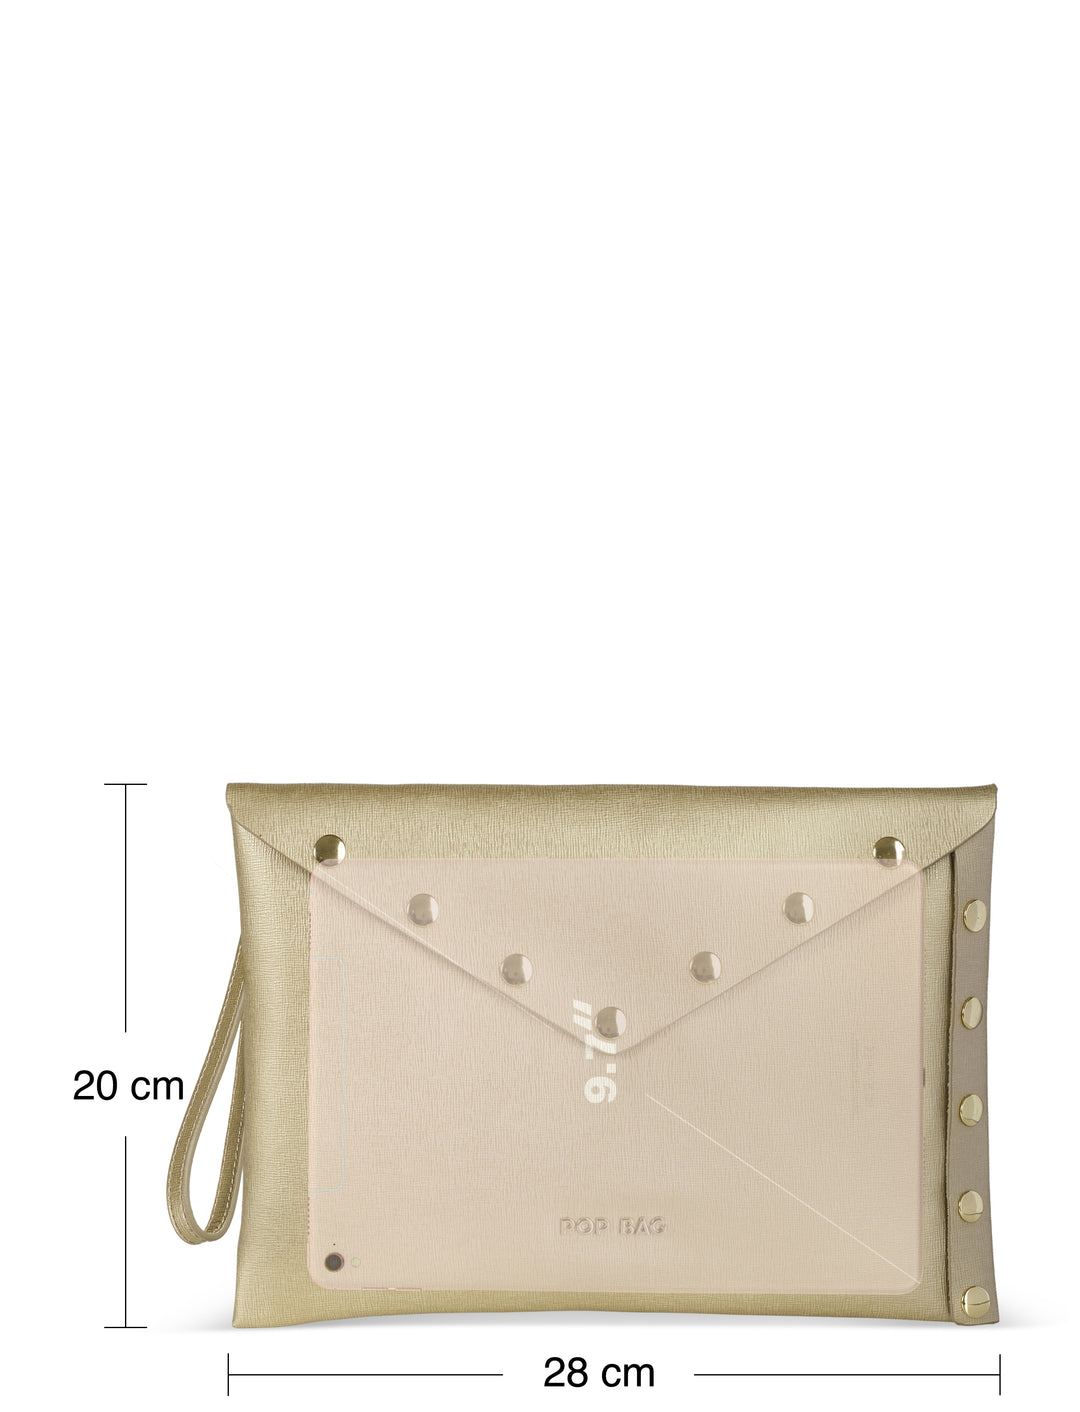 Champagne Gold Italian Smooth Leather Envelope Clutch - POP BAG USA